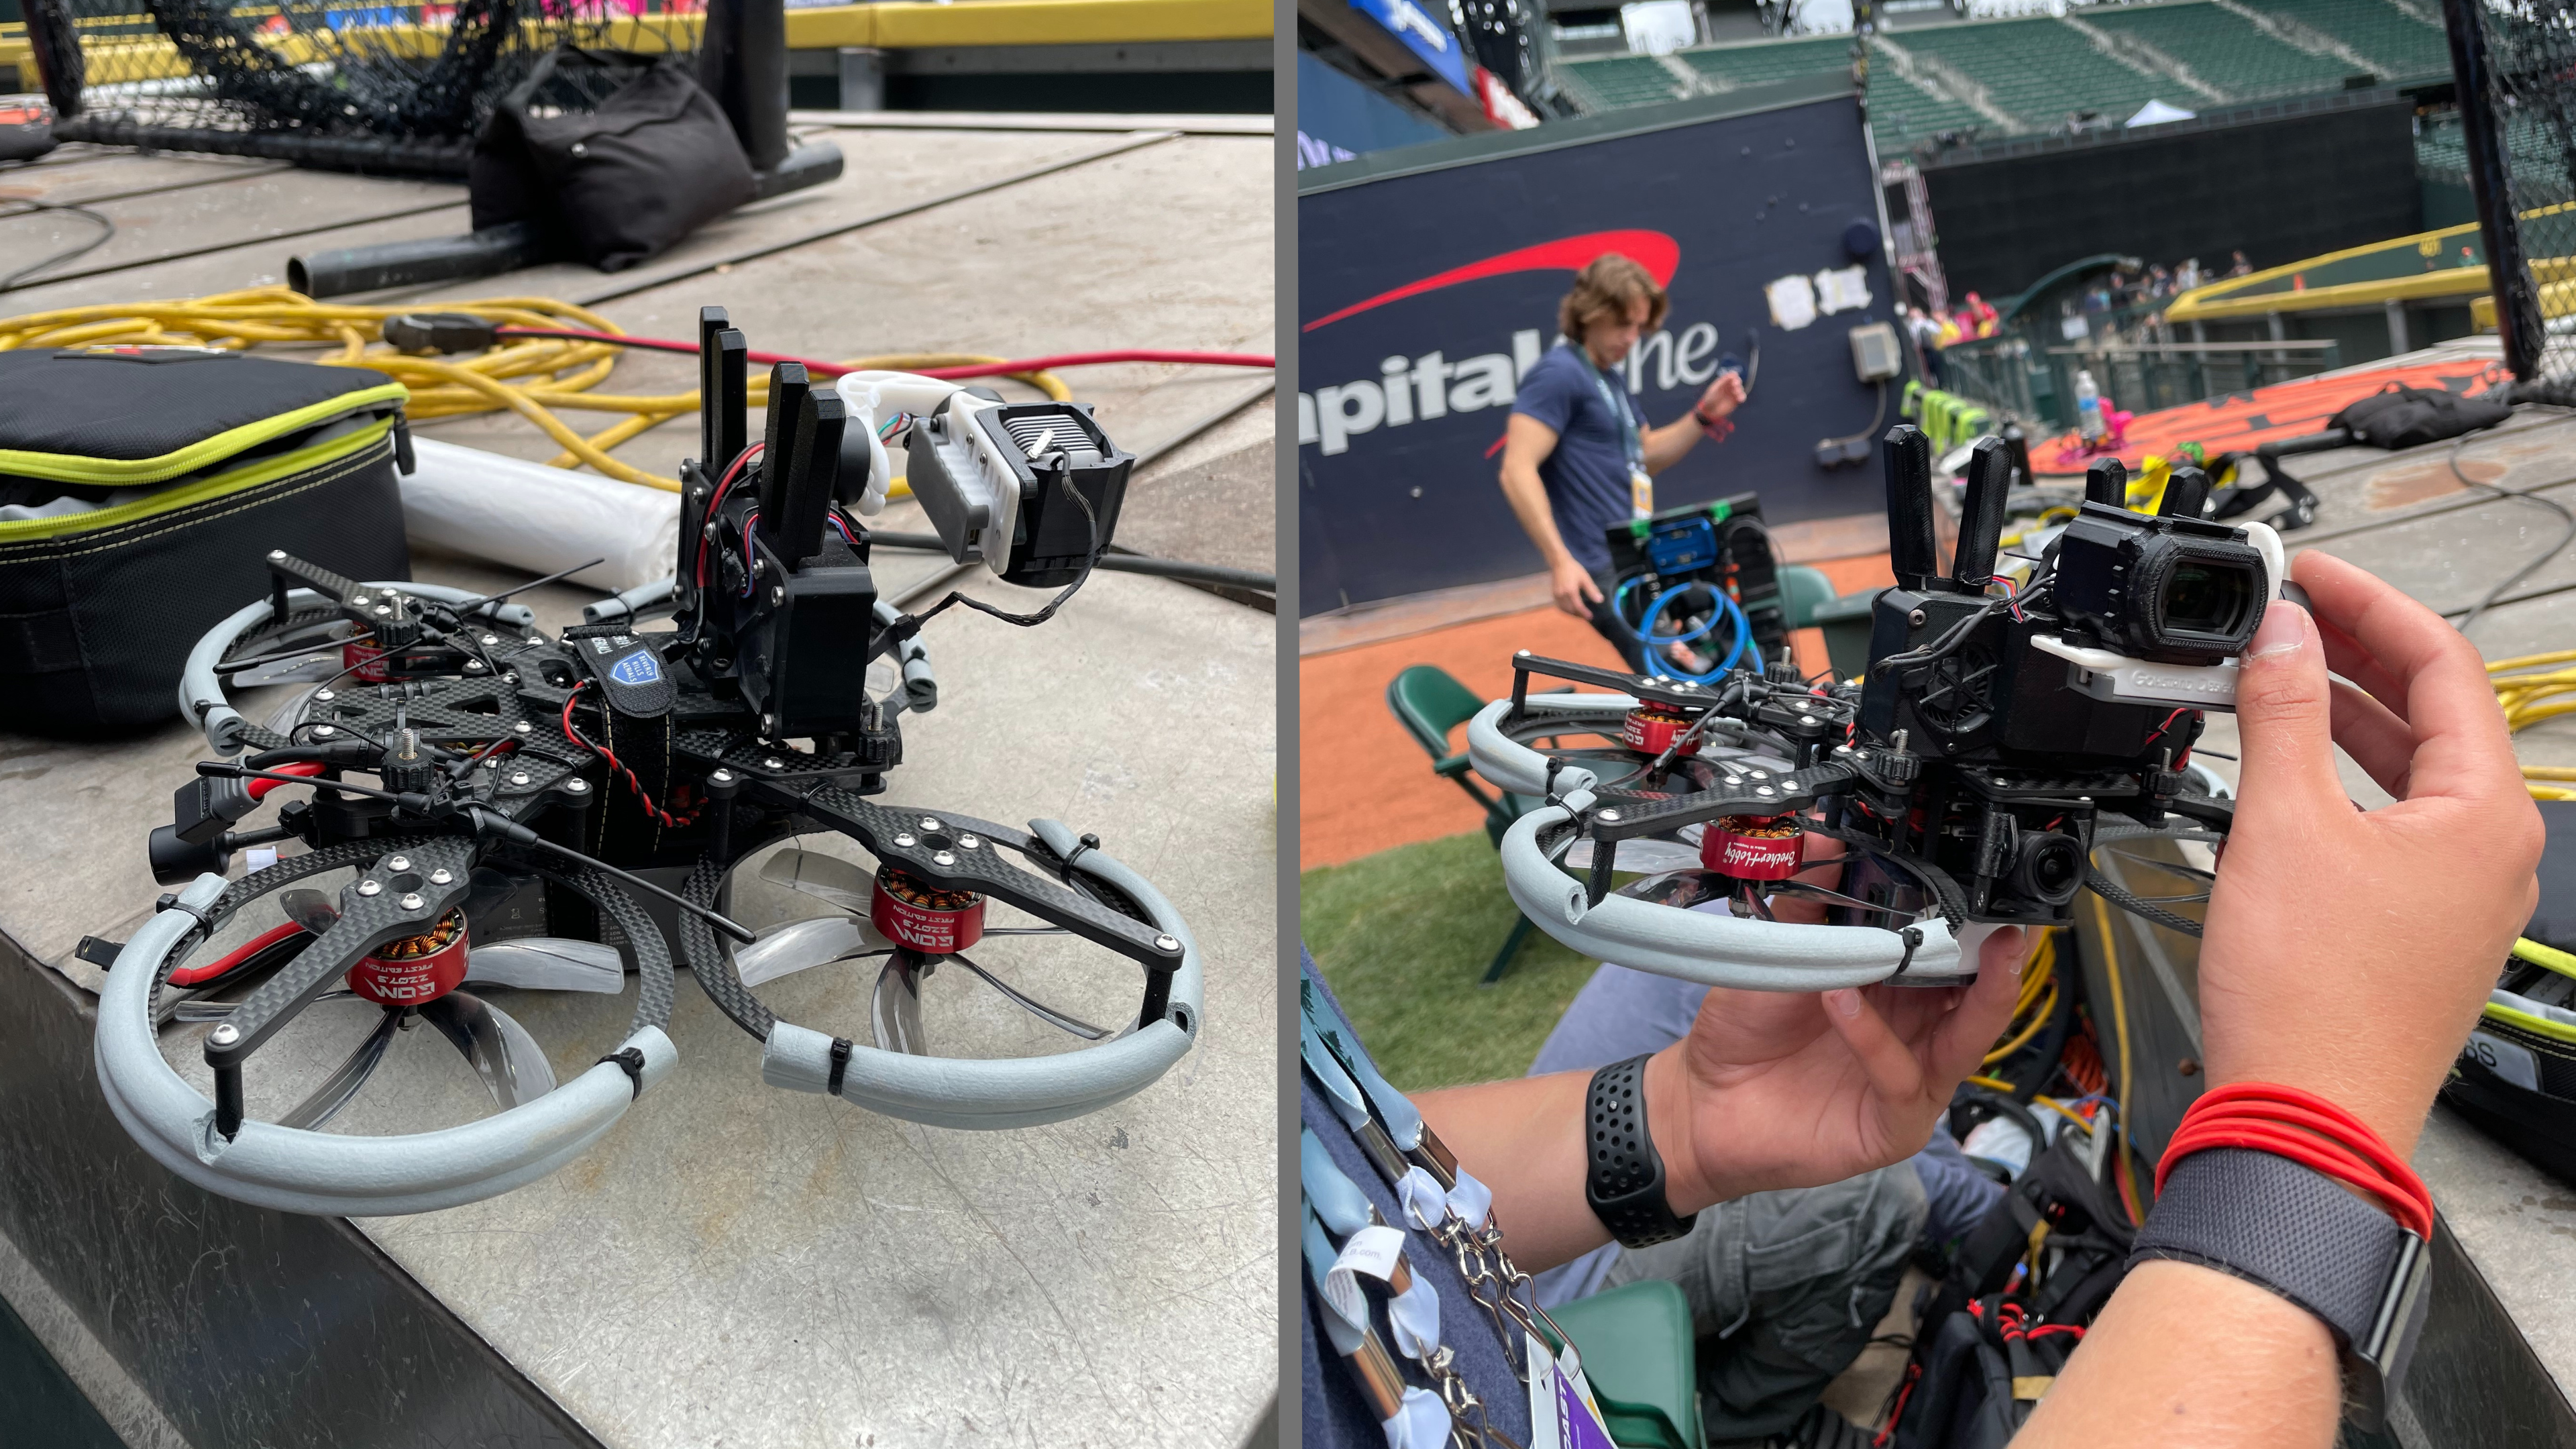 Live From MLB All-Star 2023: Fox Sports Pushes Aerial-Camera Boundaries To  Showcase Baseball's Brightest